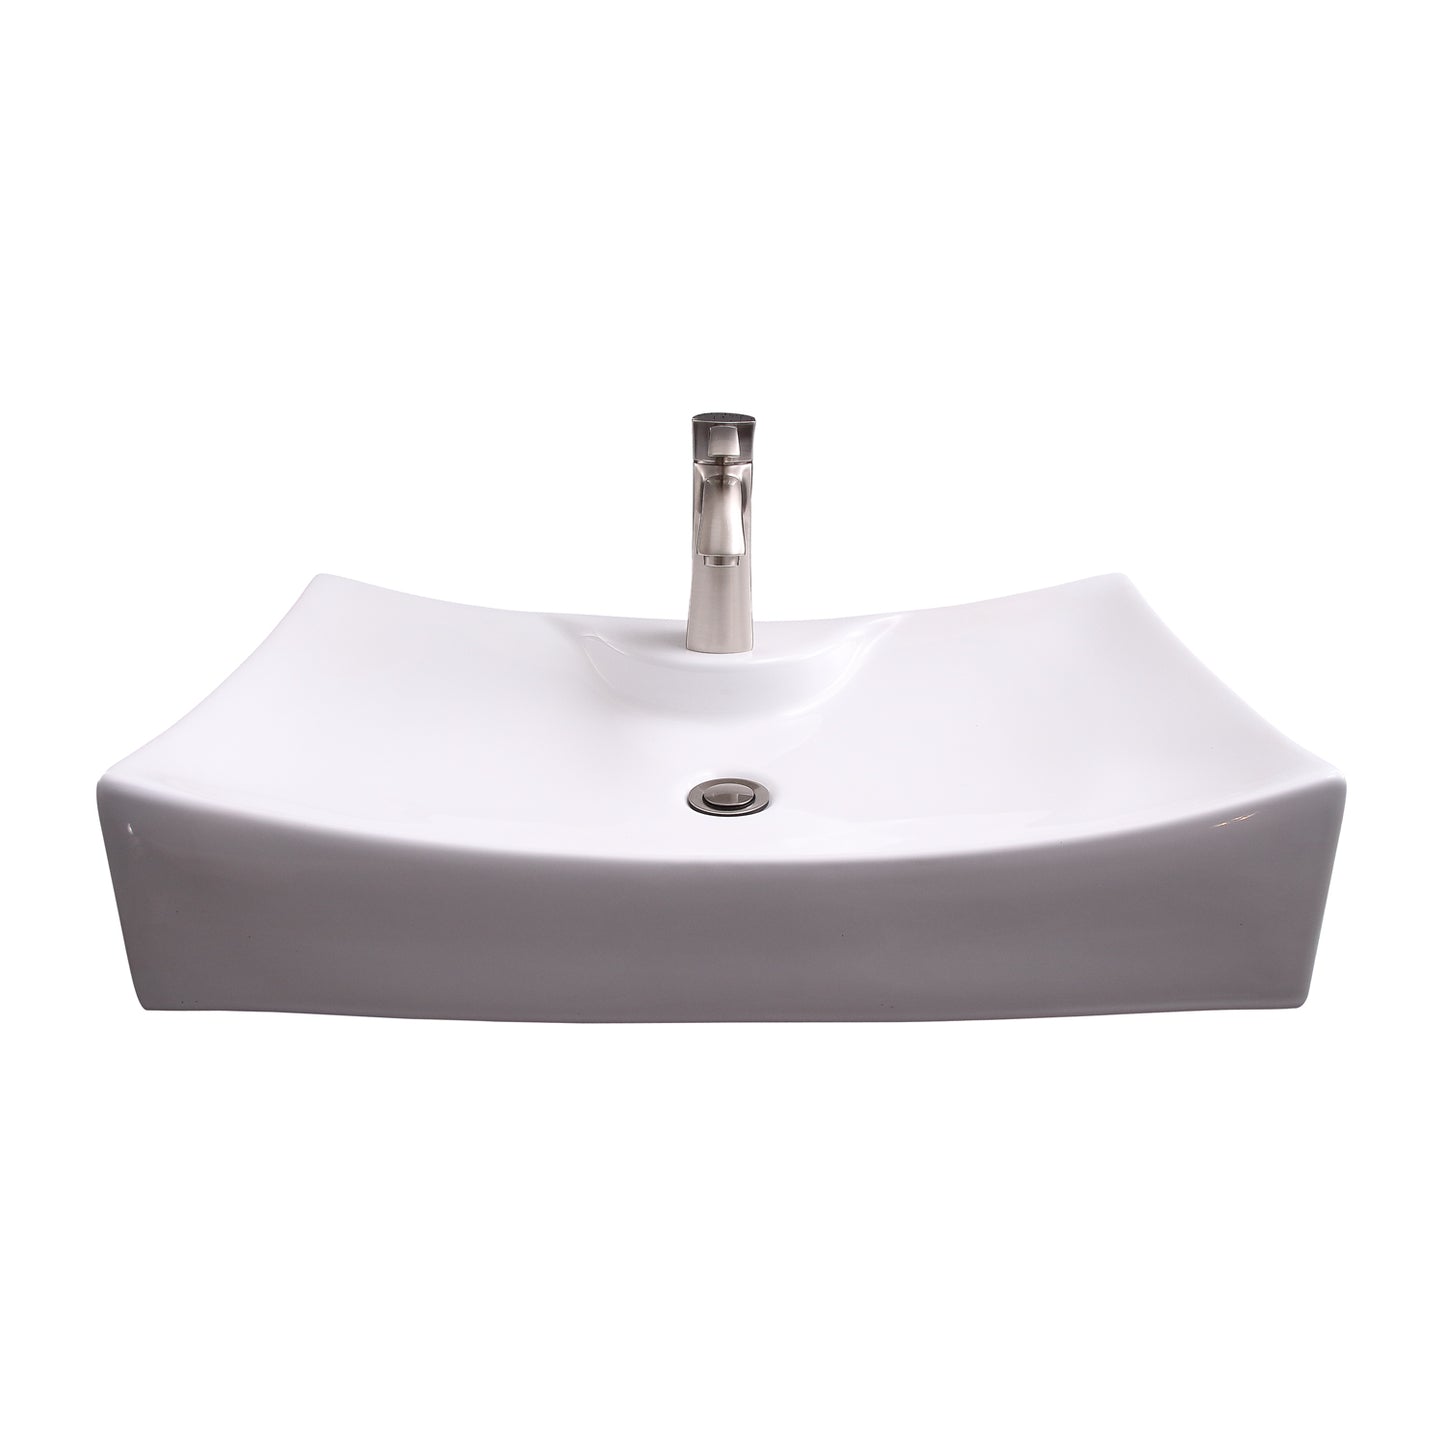 Chalmers Wall Hung 26" Rectangular Bathroom Sink 1 Faucet Hole White